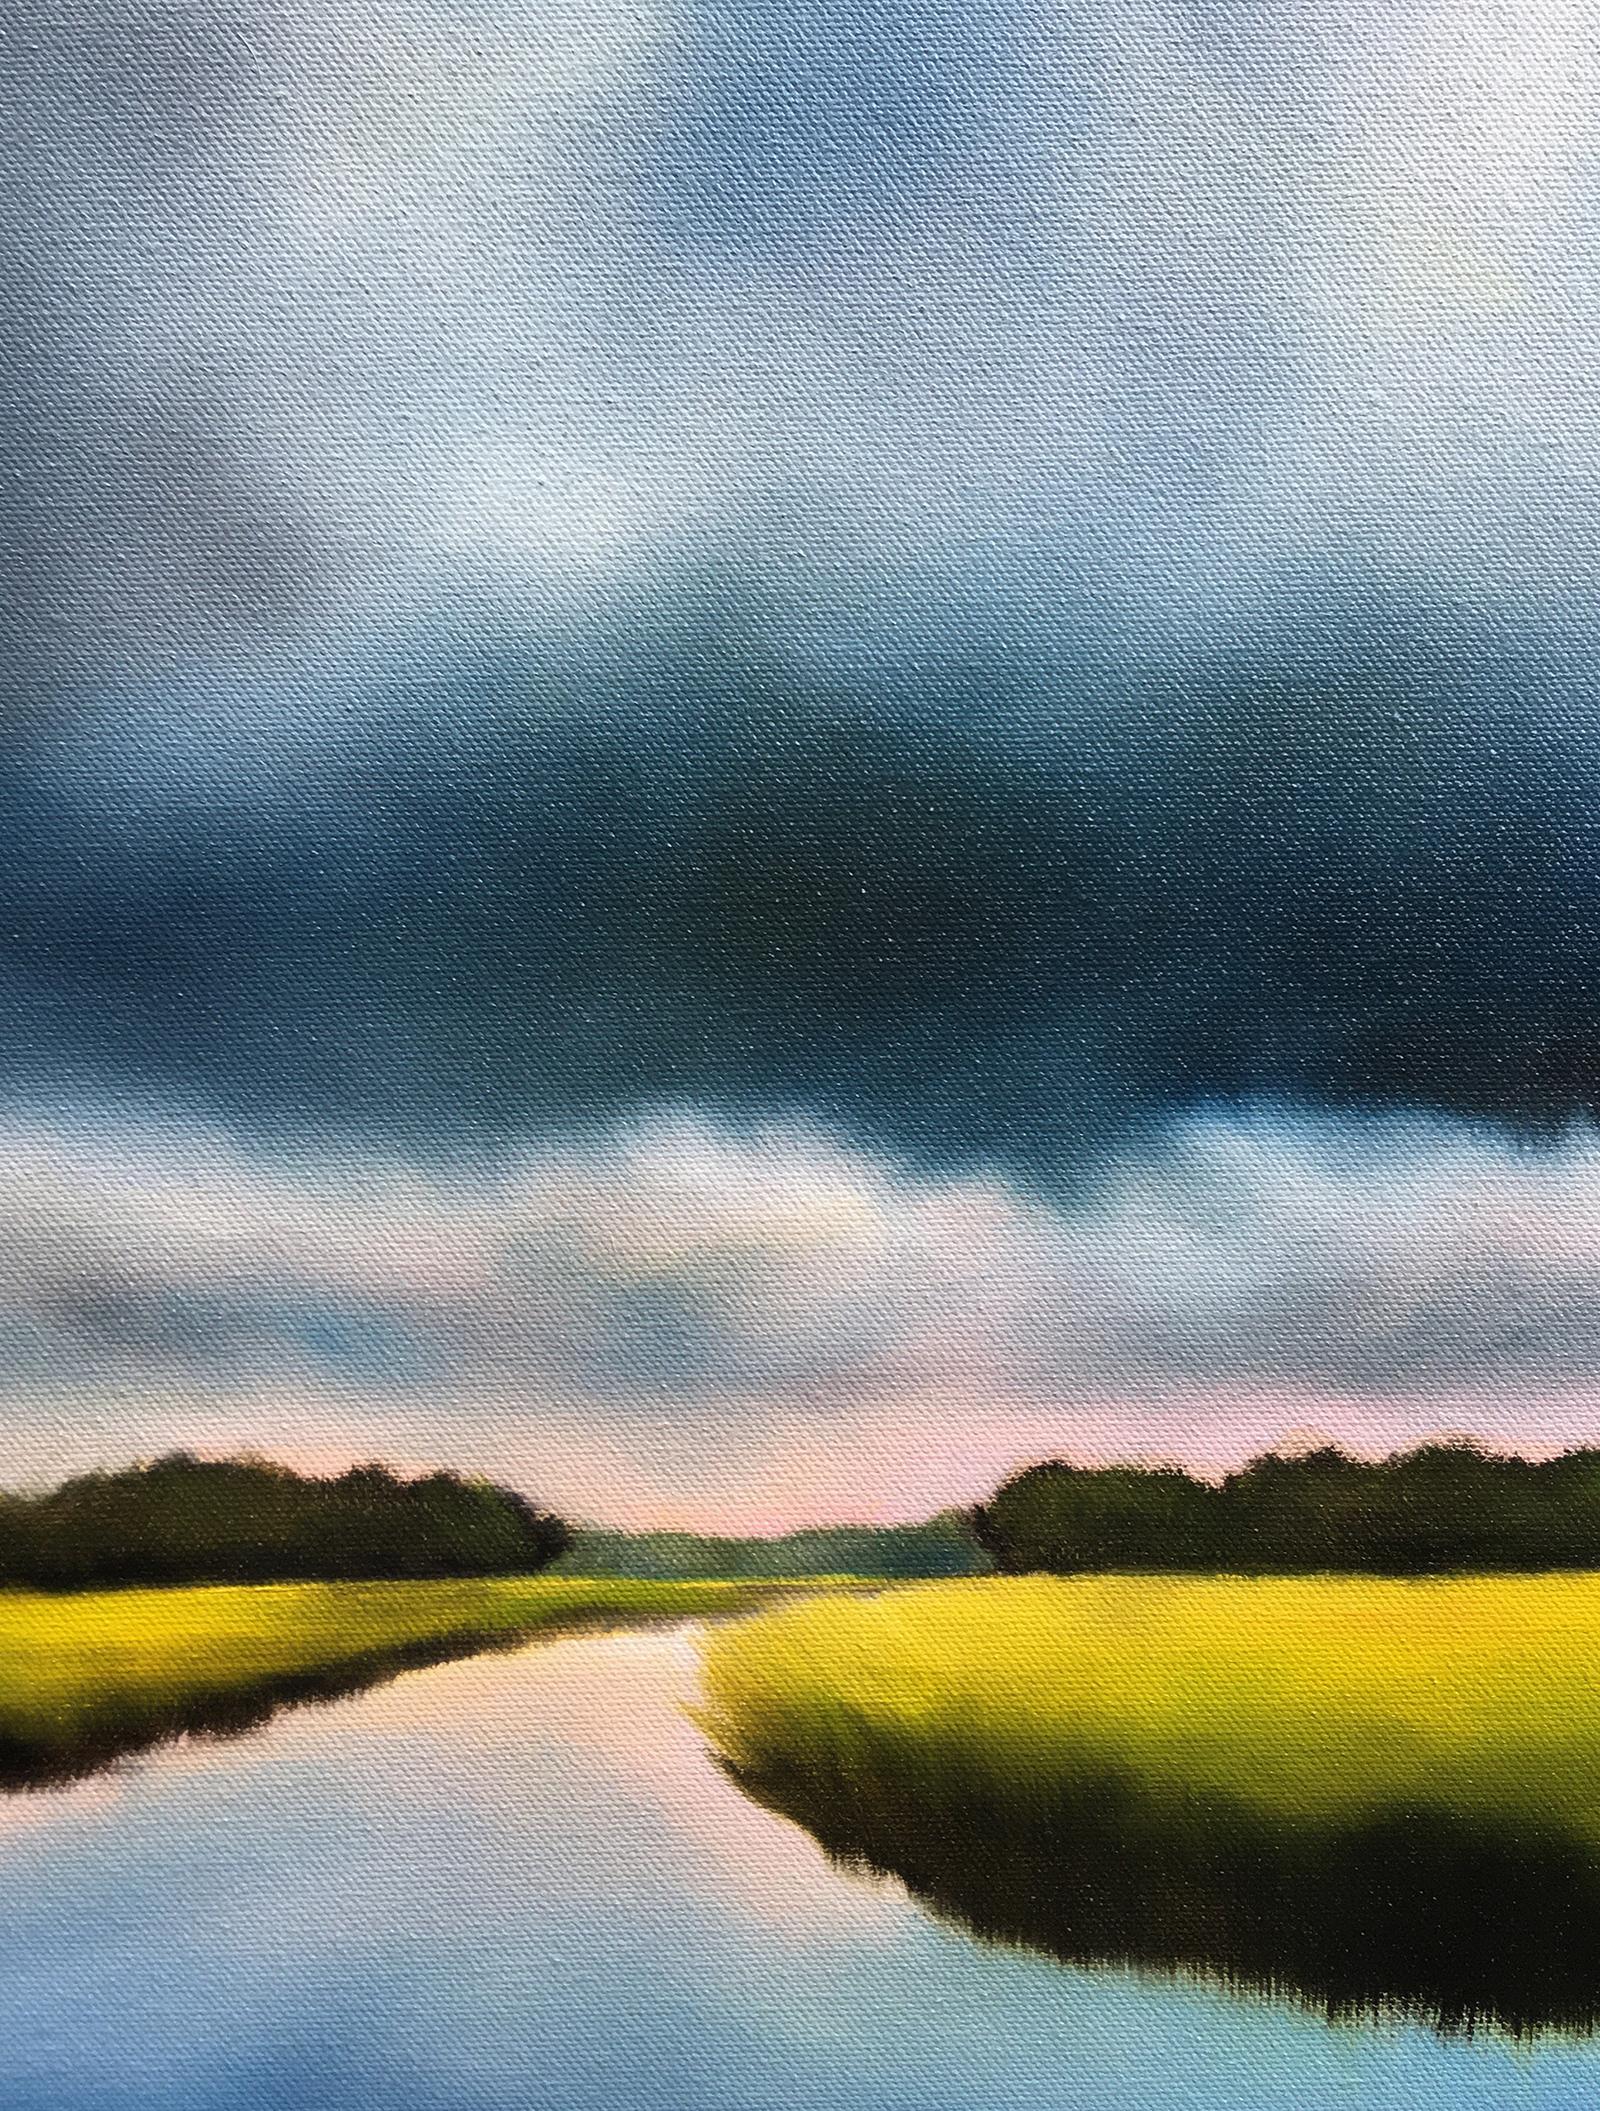 <p>Artist Comments<br />Coastal wetlands are a haven for wildlife, and to artist Nancy Hughes Miller, a place of endless inspiration. This painting features a moody sky with clouds in shades of blue floating over vibrant marsh grasses. 